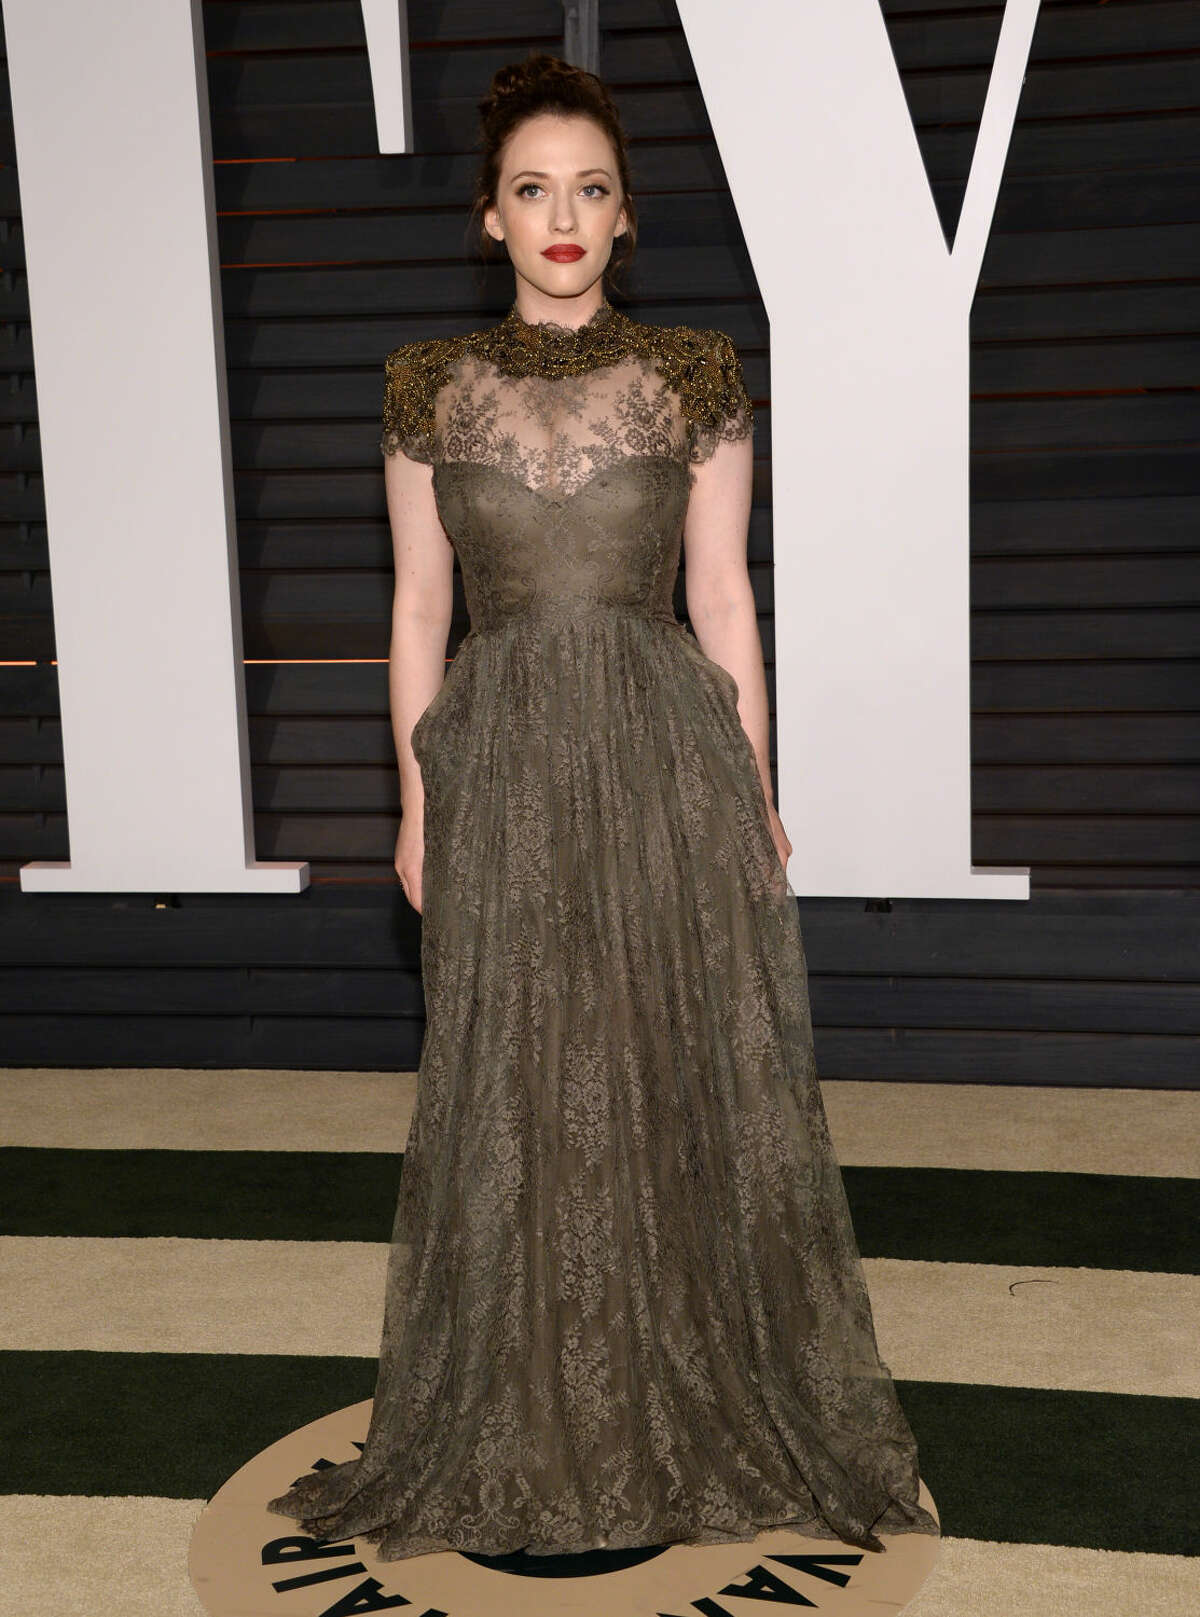 Kat Dennings arrives at the 2015 Vanity Fair Oscar Party on Sunday, Feb. 22, 2015, in Beverly Hills, Calif. (Photo by Evan Agostini/Invision/AP)